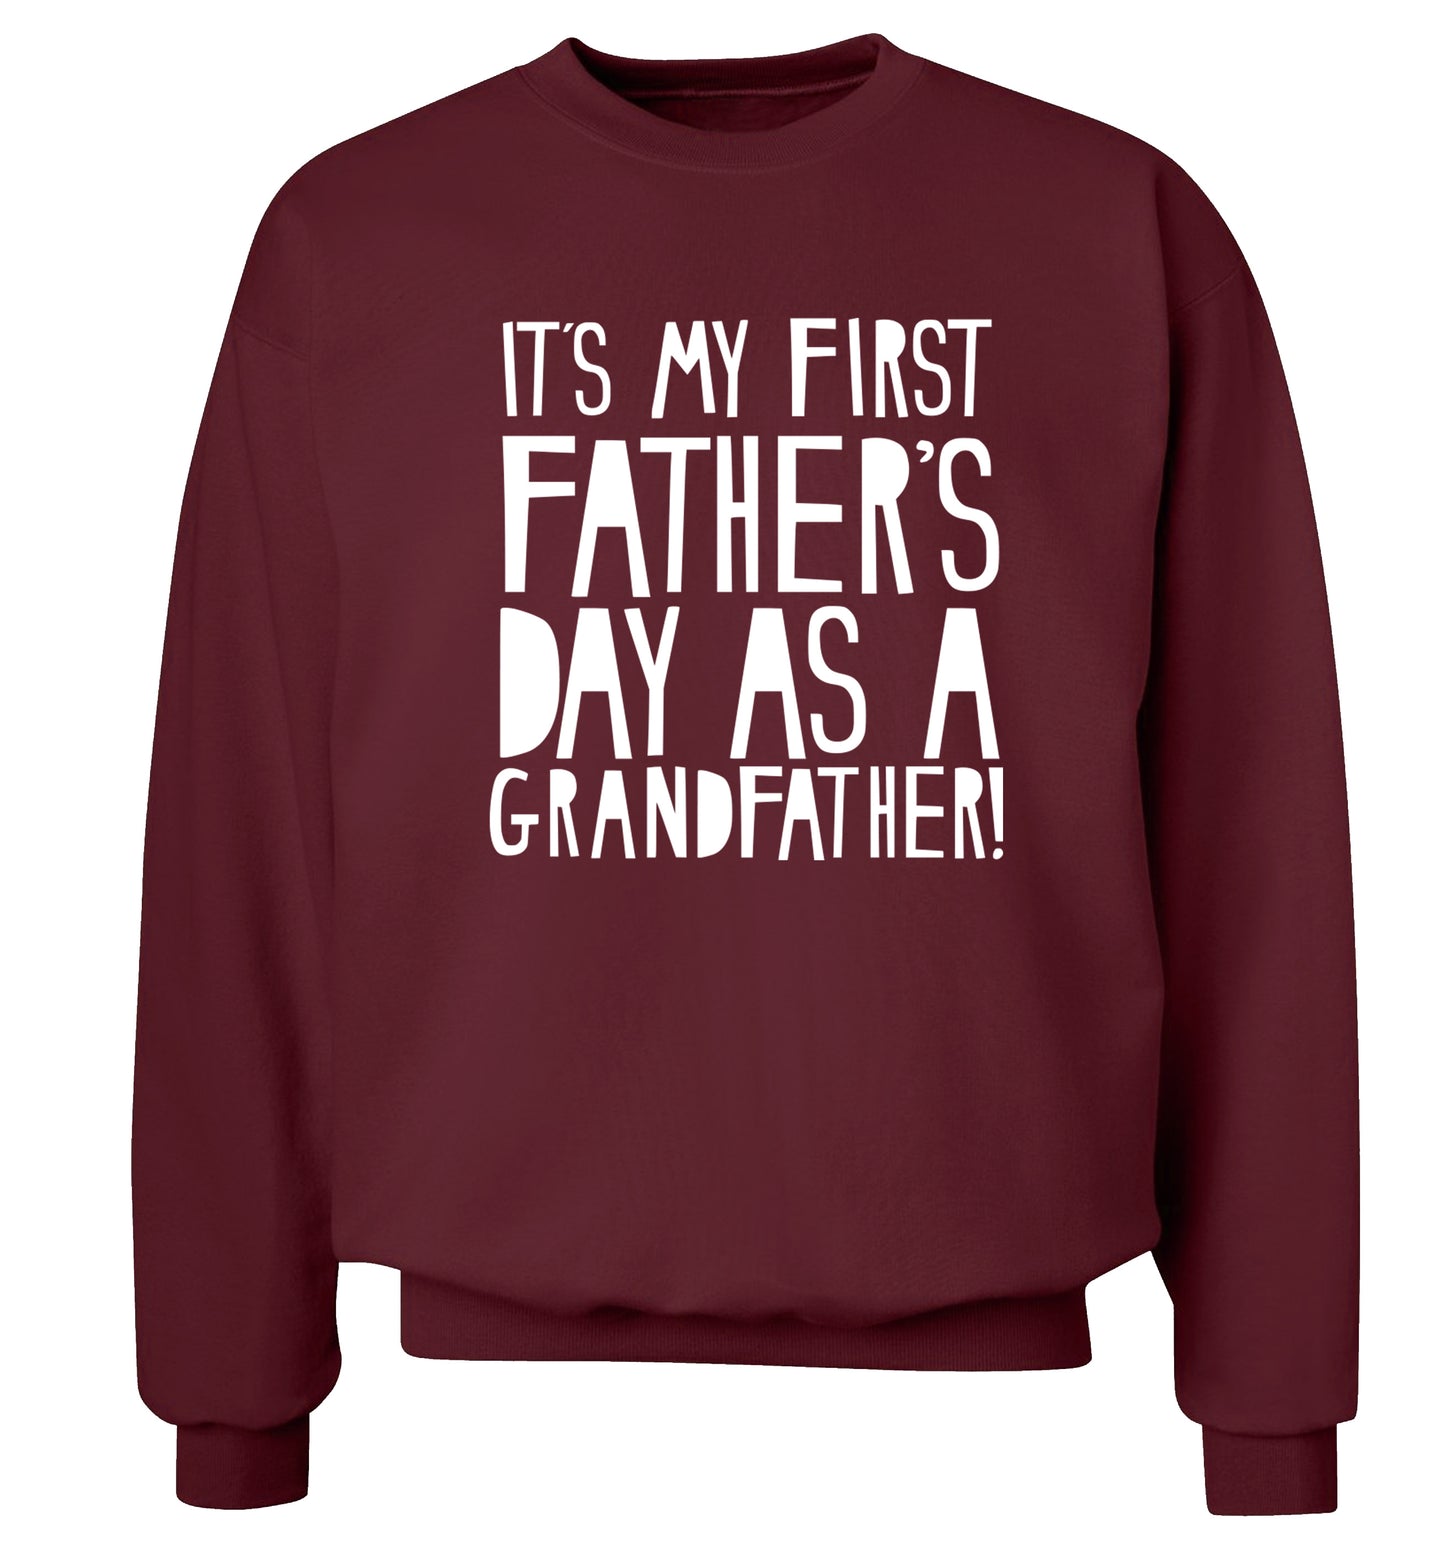 It's my first Father's Day as a Grandfather! Adult's unisex maroon Sweater 2XL